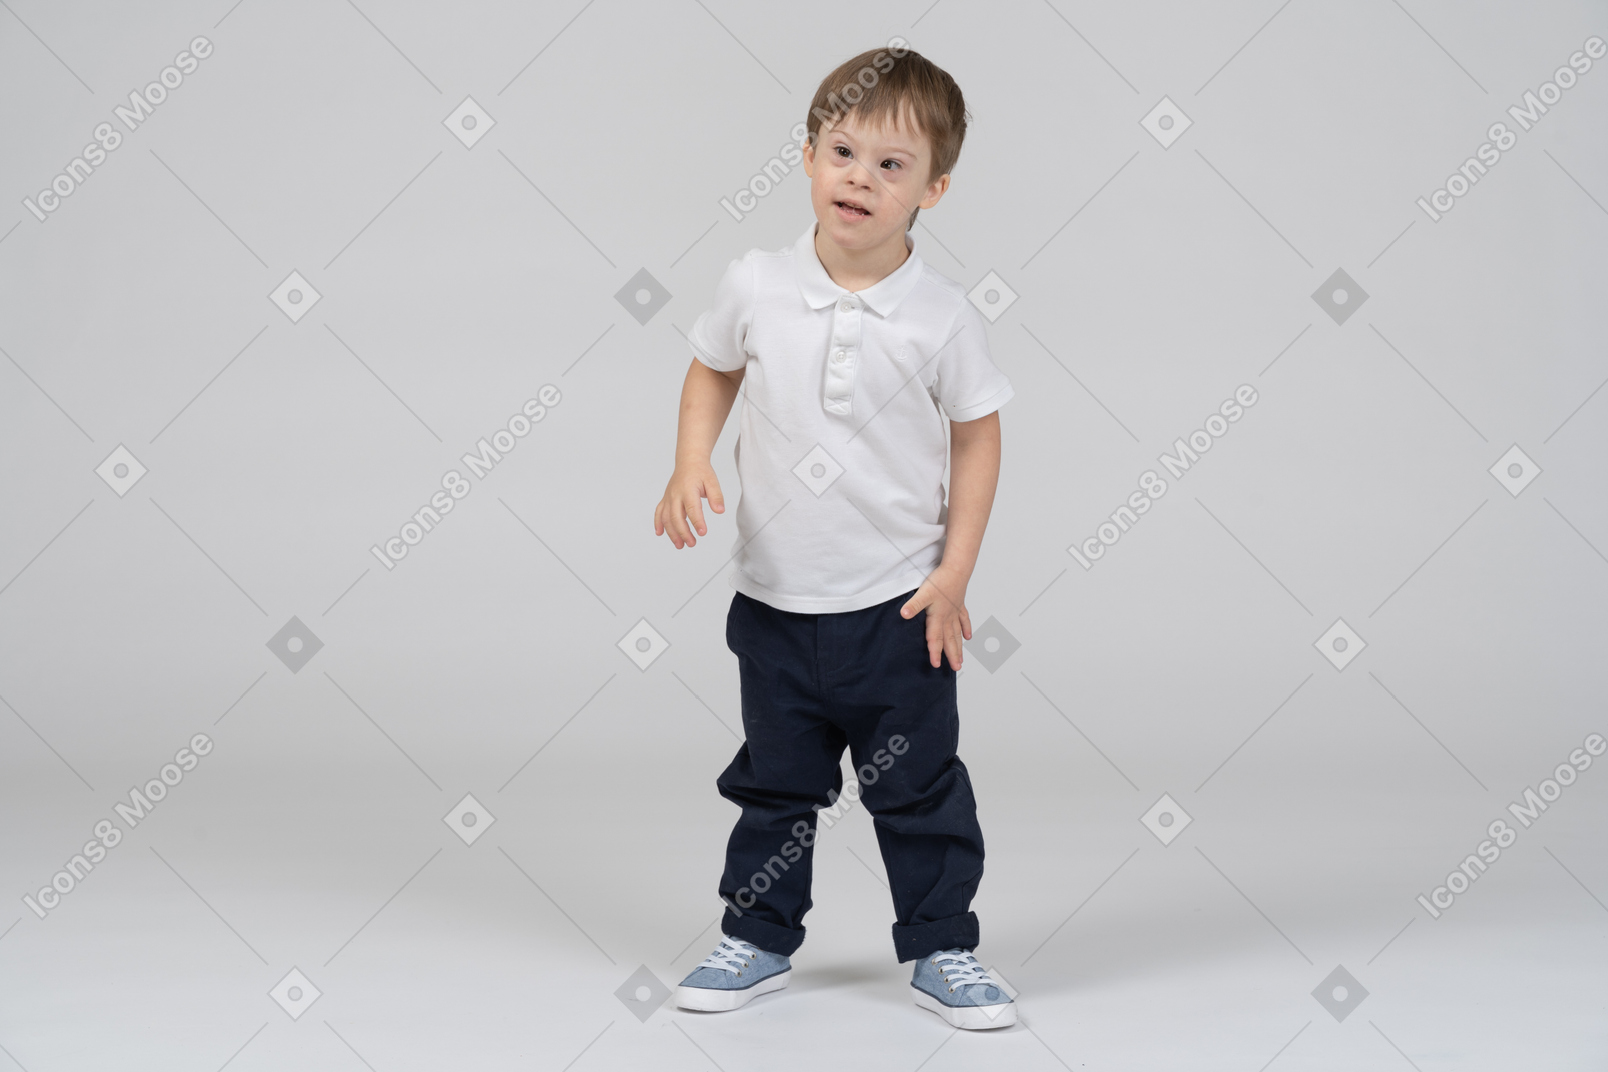 Little boy standing with arms at sides